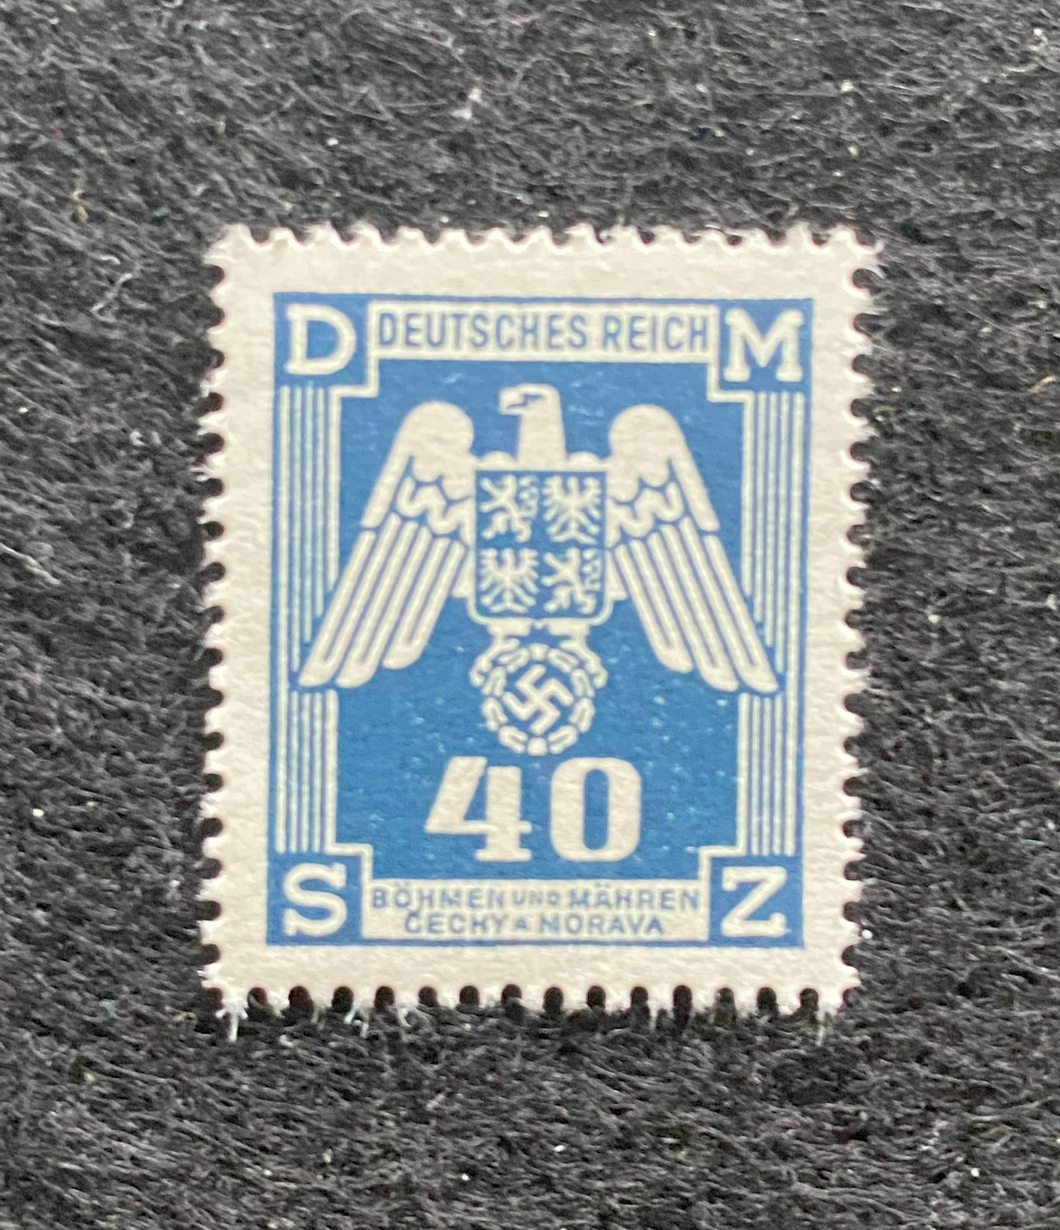 Rare Old Authentic WWII Eagle German Unused Stamp with SWASTIKA - 40K